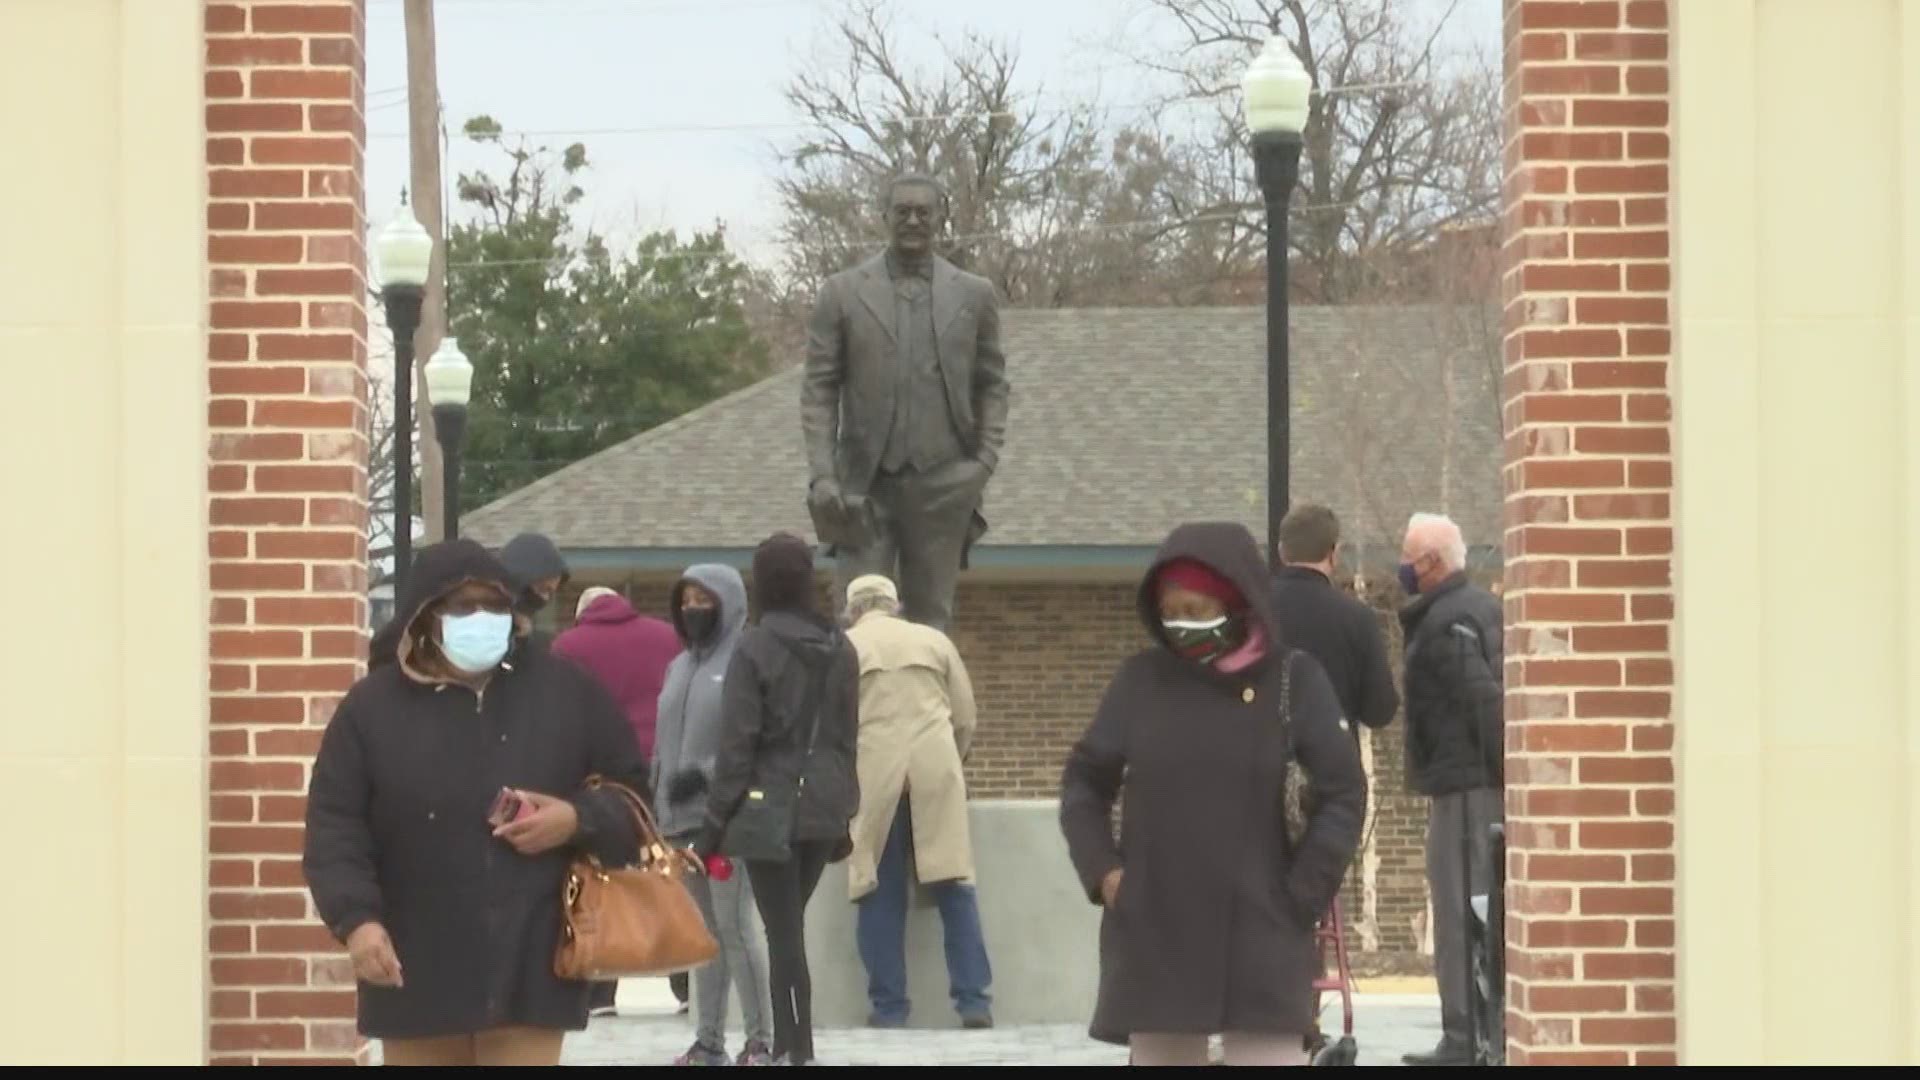 Huntsville city leaders and the community celebrated the unveiling of the bronze statue at the new Councill High Memorial Park.